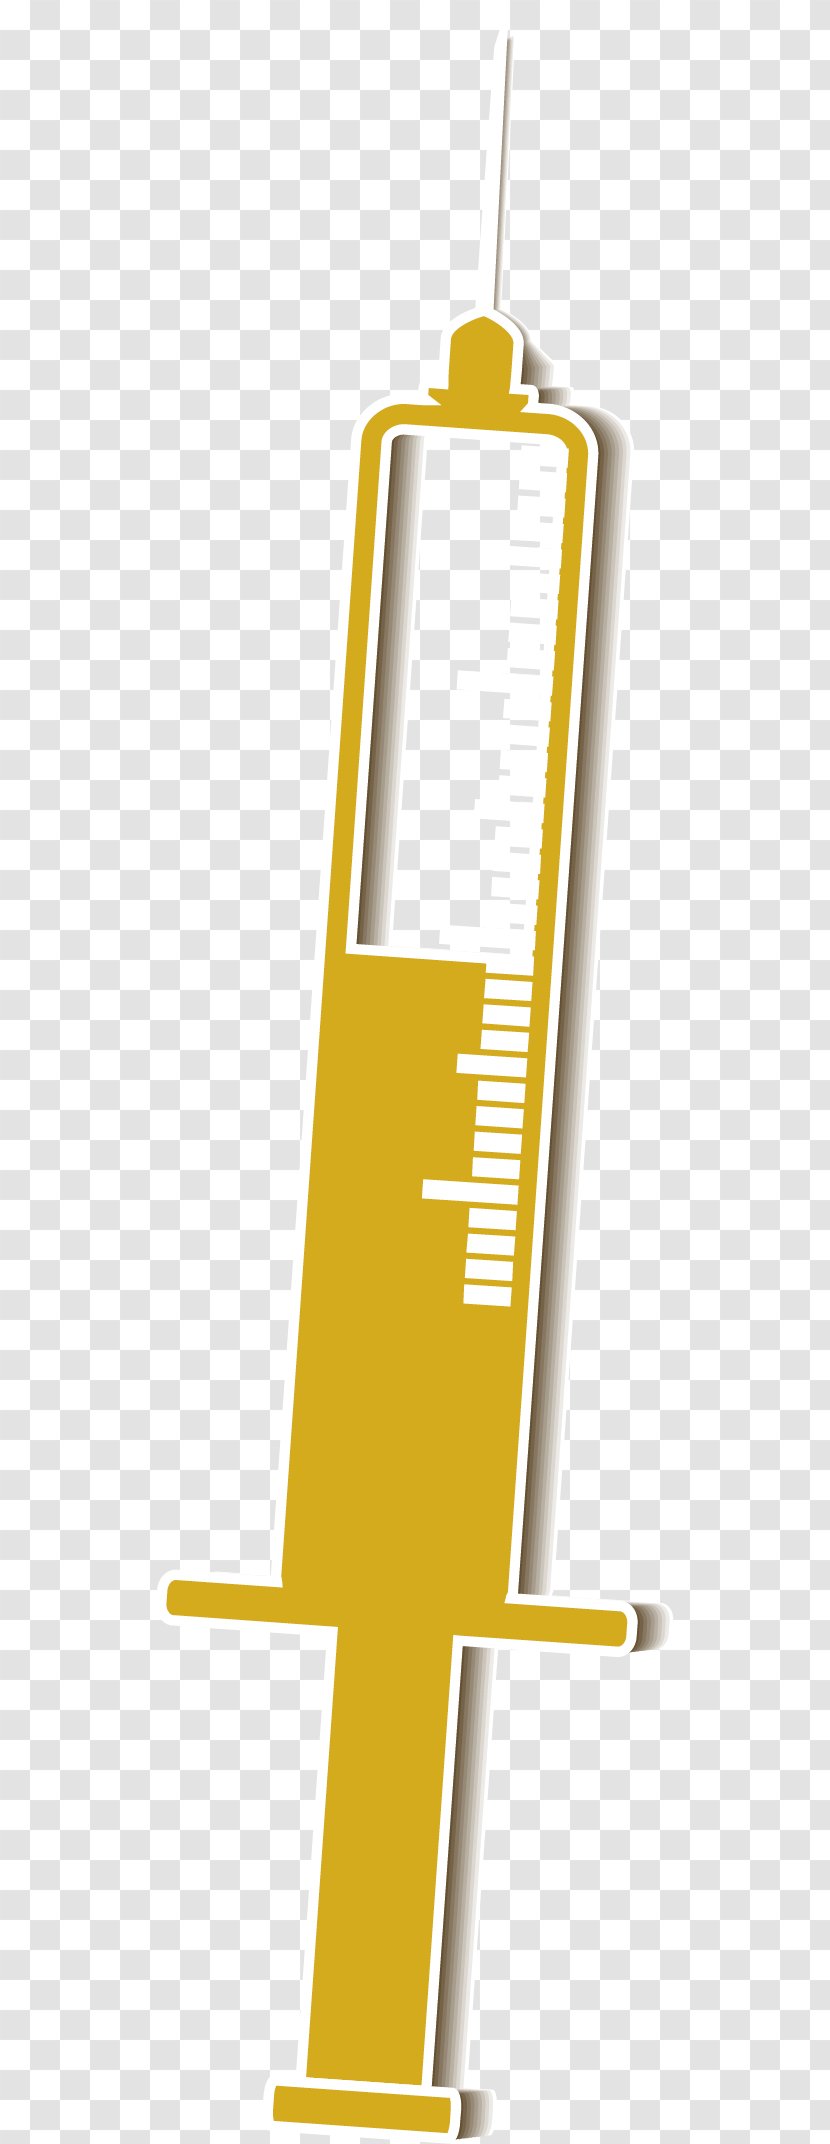 Syringe Yellow Graphic Design Hypodermic Needle Injection - Technology Transparent PNG